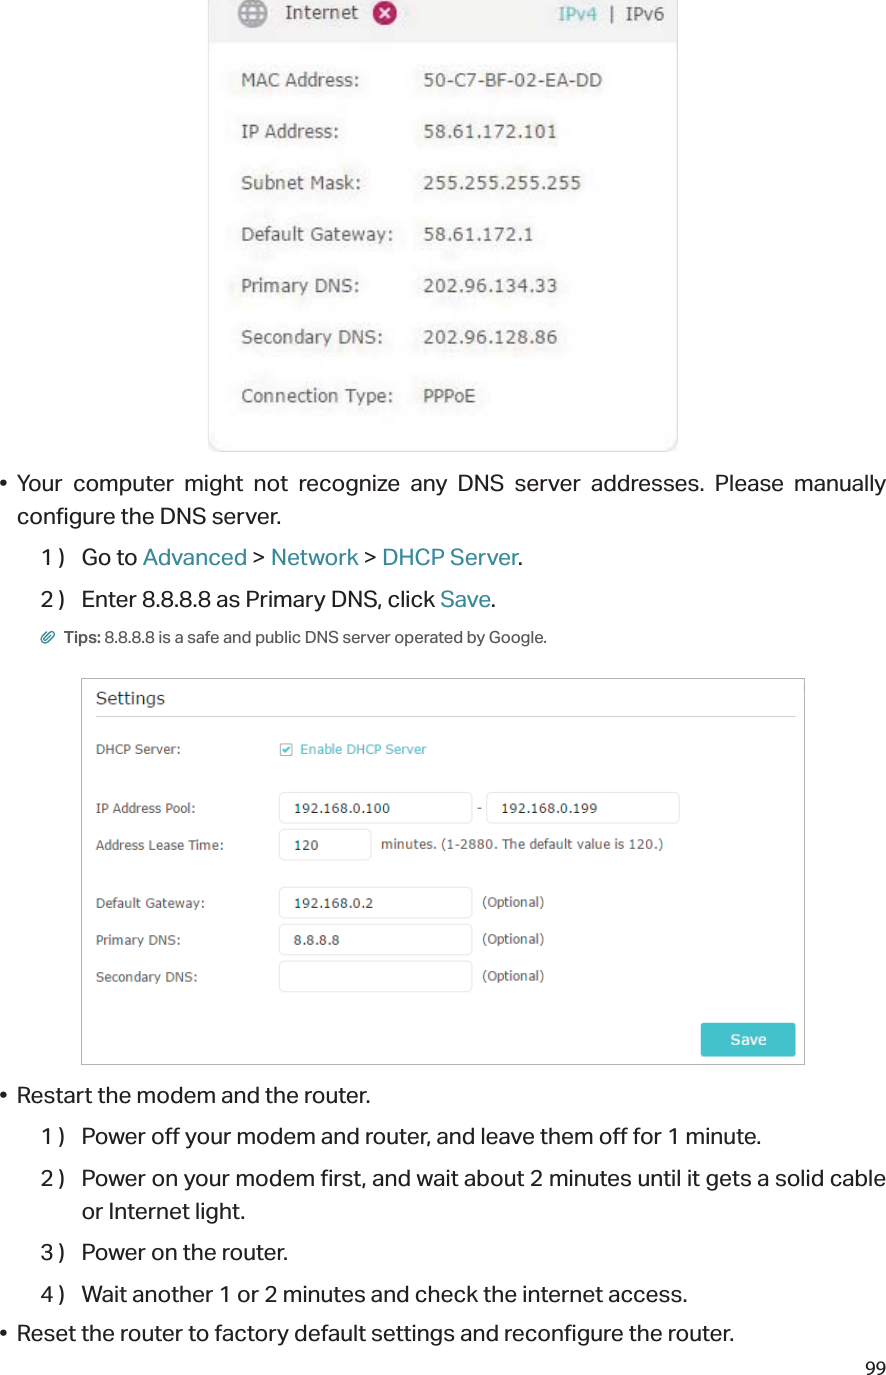 99• Your computer might not recognize any DNS server addresses. Please manually configure the DNS server.1 )  Go to Advanced &gt; Network &gt; DHCP Server.2 )  Enter 8.8.8.8 as Primary DNS, click Save. Tips: 8.8.8.8 is a safe and public DNS server operated by Google.•  Restart the modem and the router.1 )  Power off your modem and router, and leave them off for 1 minute.2 )  Power on your modem first, and wait about 2 minutes until it gets a solid cable or Internet light.3 )  Power on the router.4 )  Wait another 1 or 2 minutes and check the internet access.•  Reset the router to factory default settings and reconfigure the router.